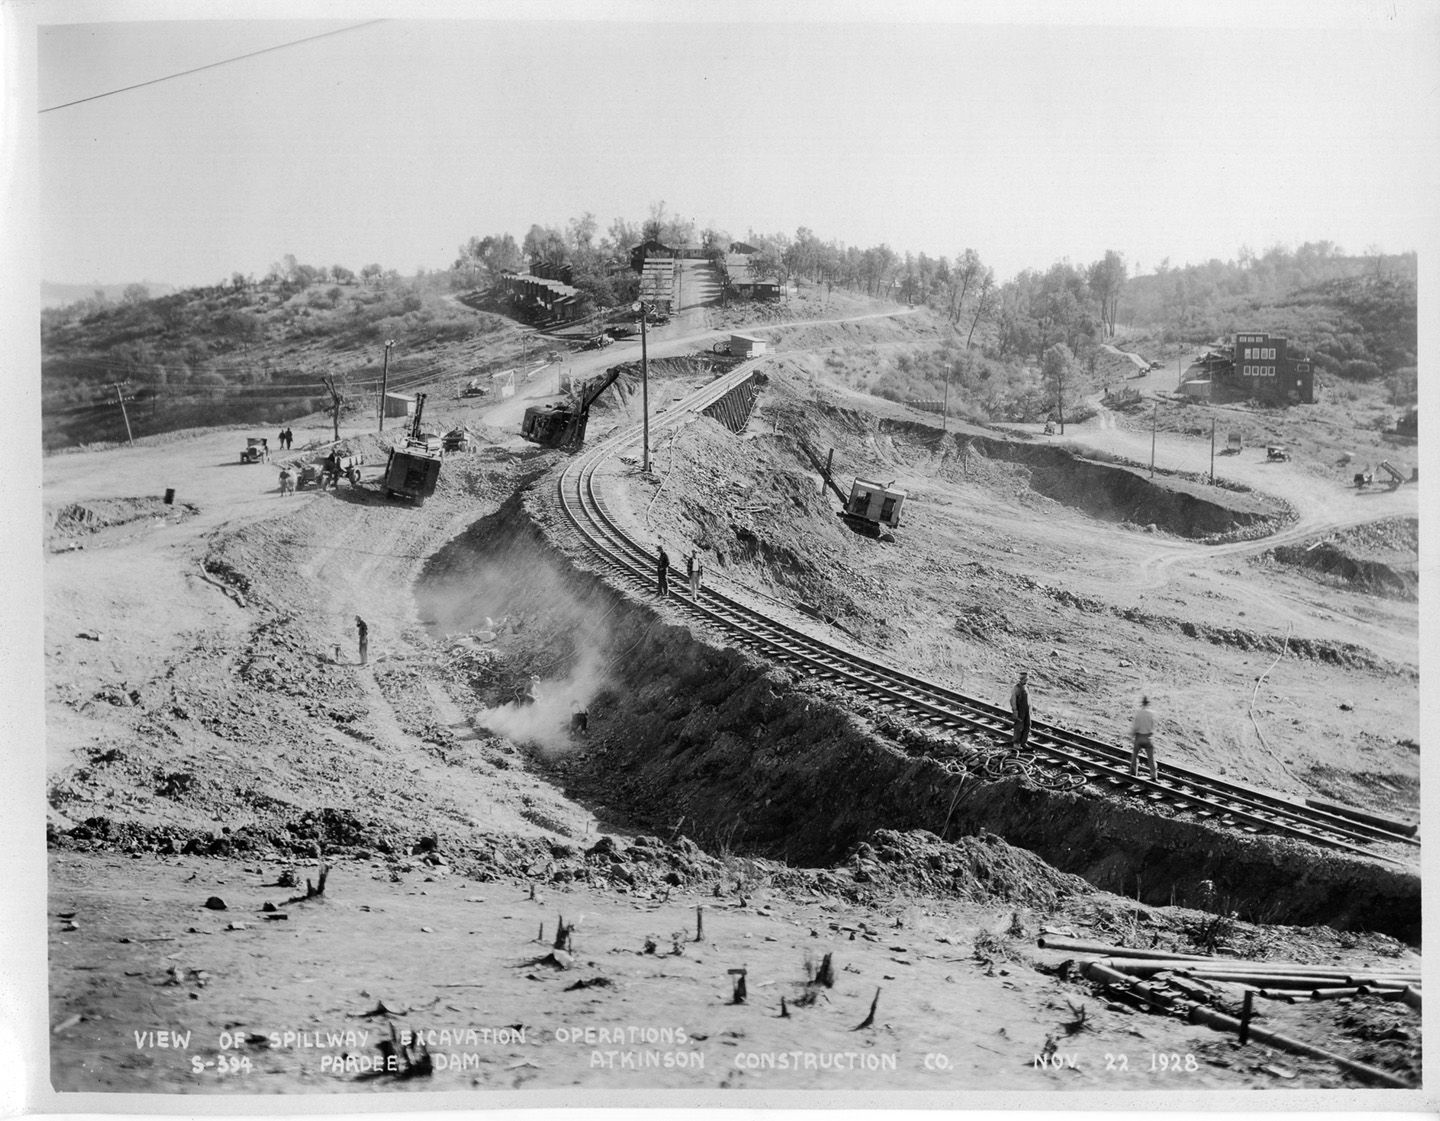 View of spillway excavation operations. (November 1928)